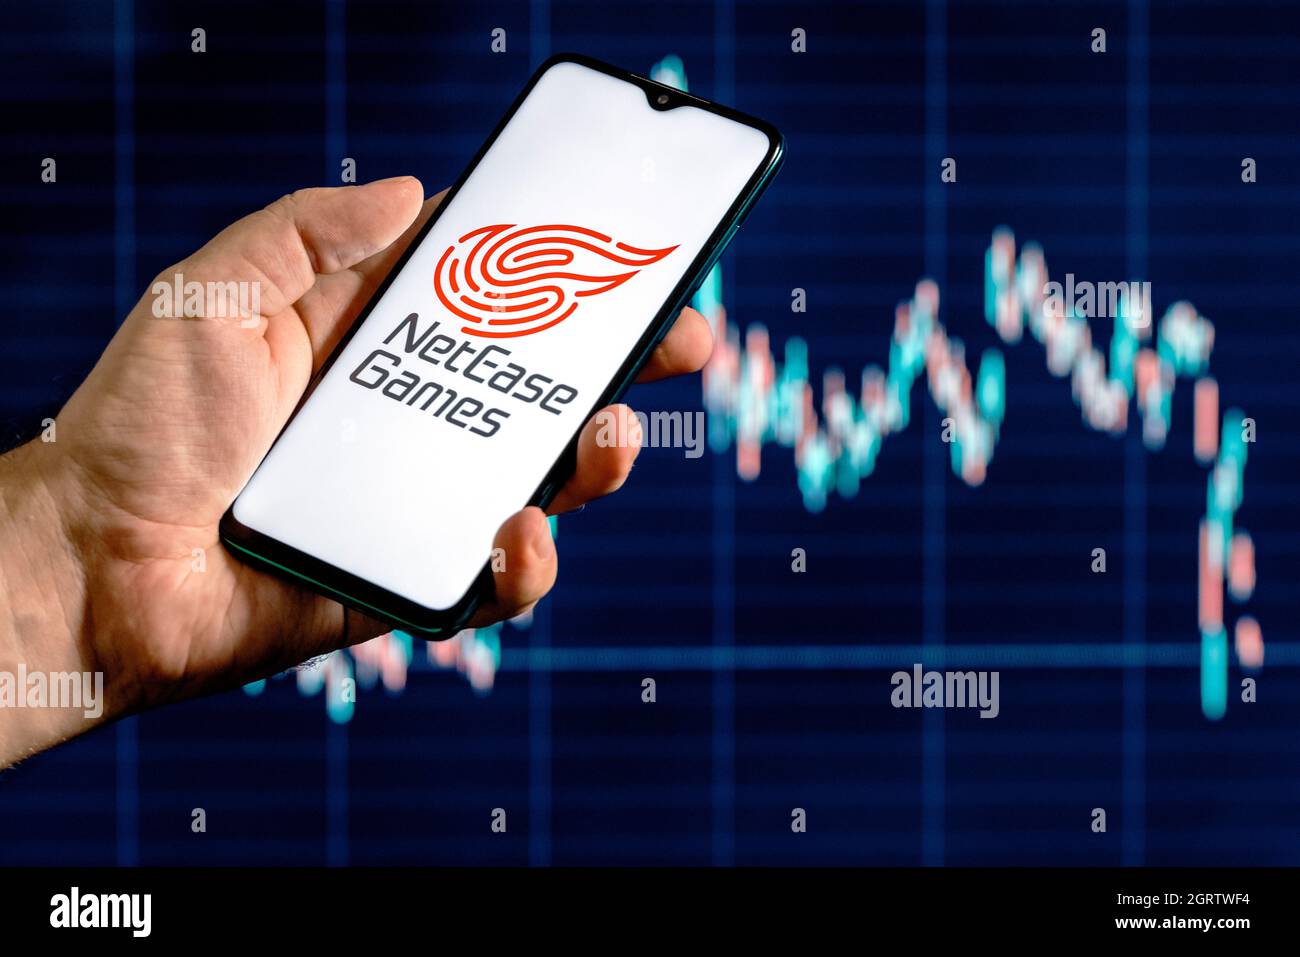 A smartphone with the NetEase logo in a hand. Stock chart on the background. Stock Photo